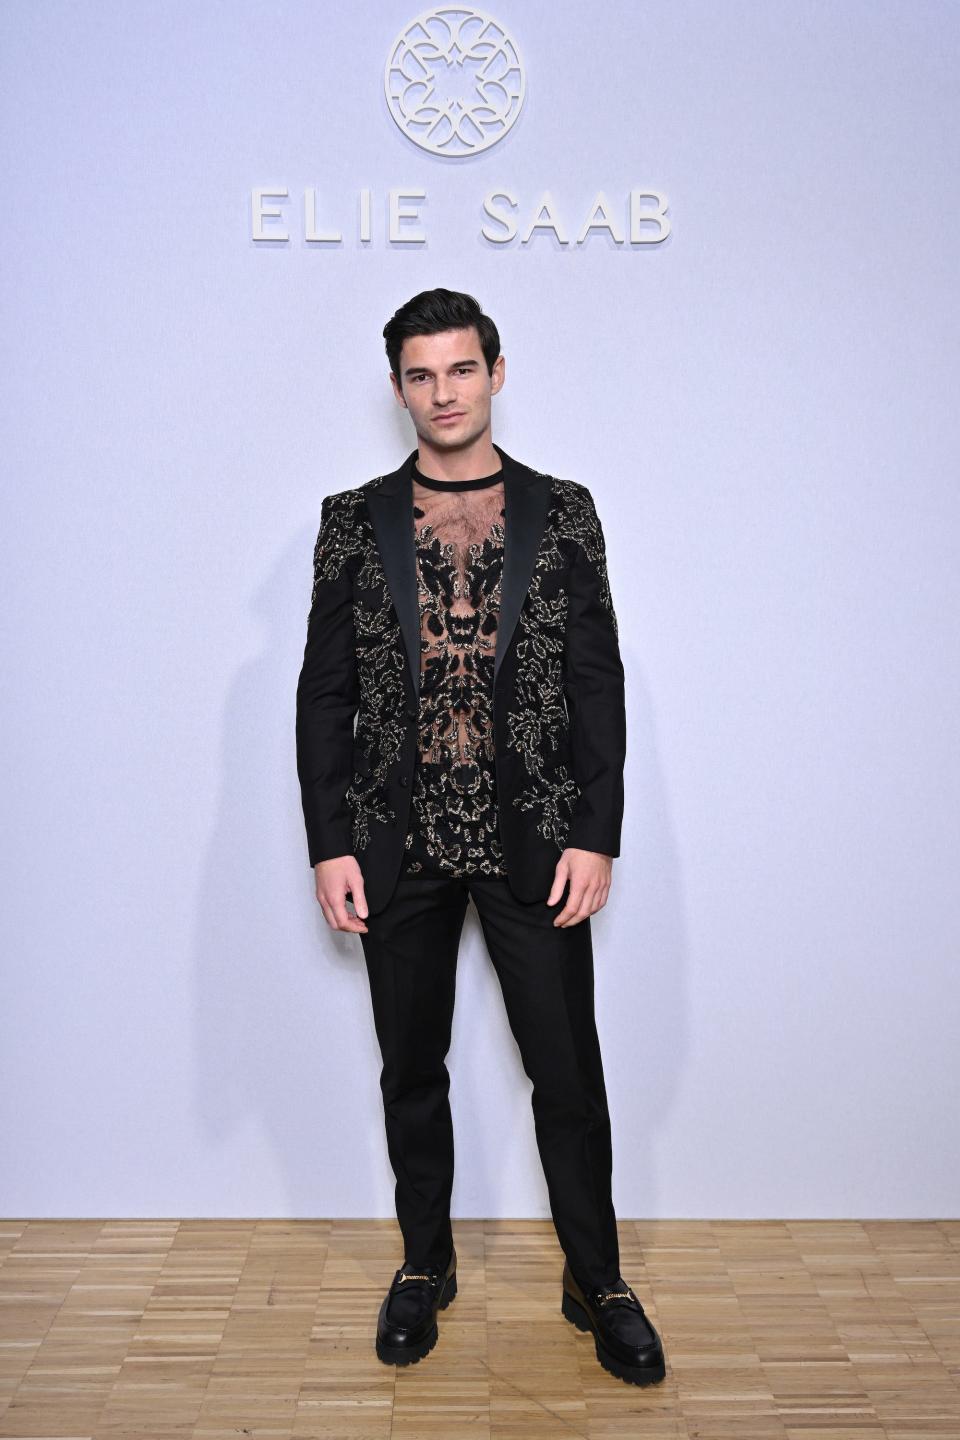 Paul Forman attends the Elie Saab Haute Couture show at Paris Fashion Week on January 25, 2023.